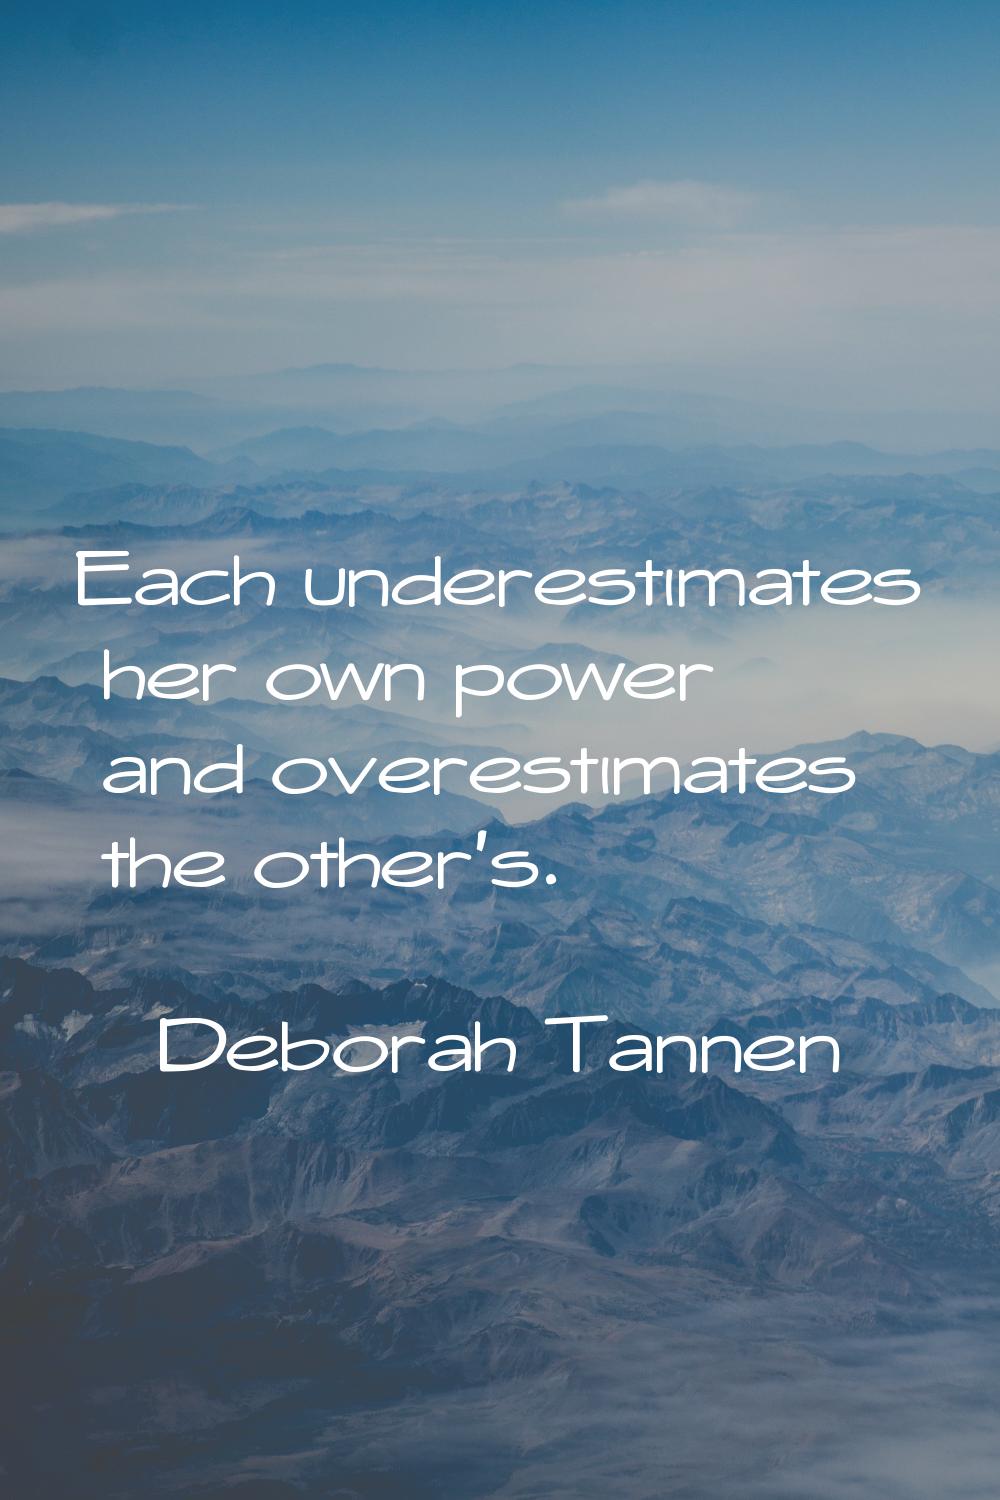 Each underestimates her own power and overestimates the other's.